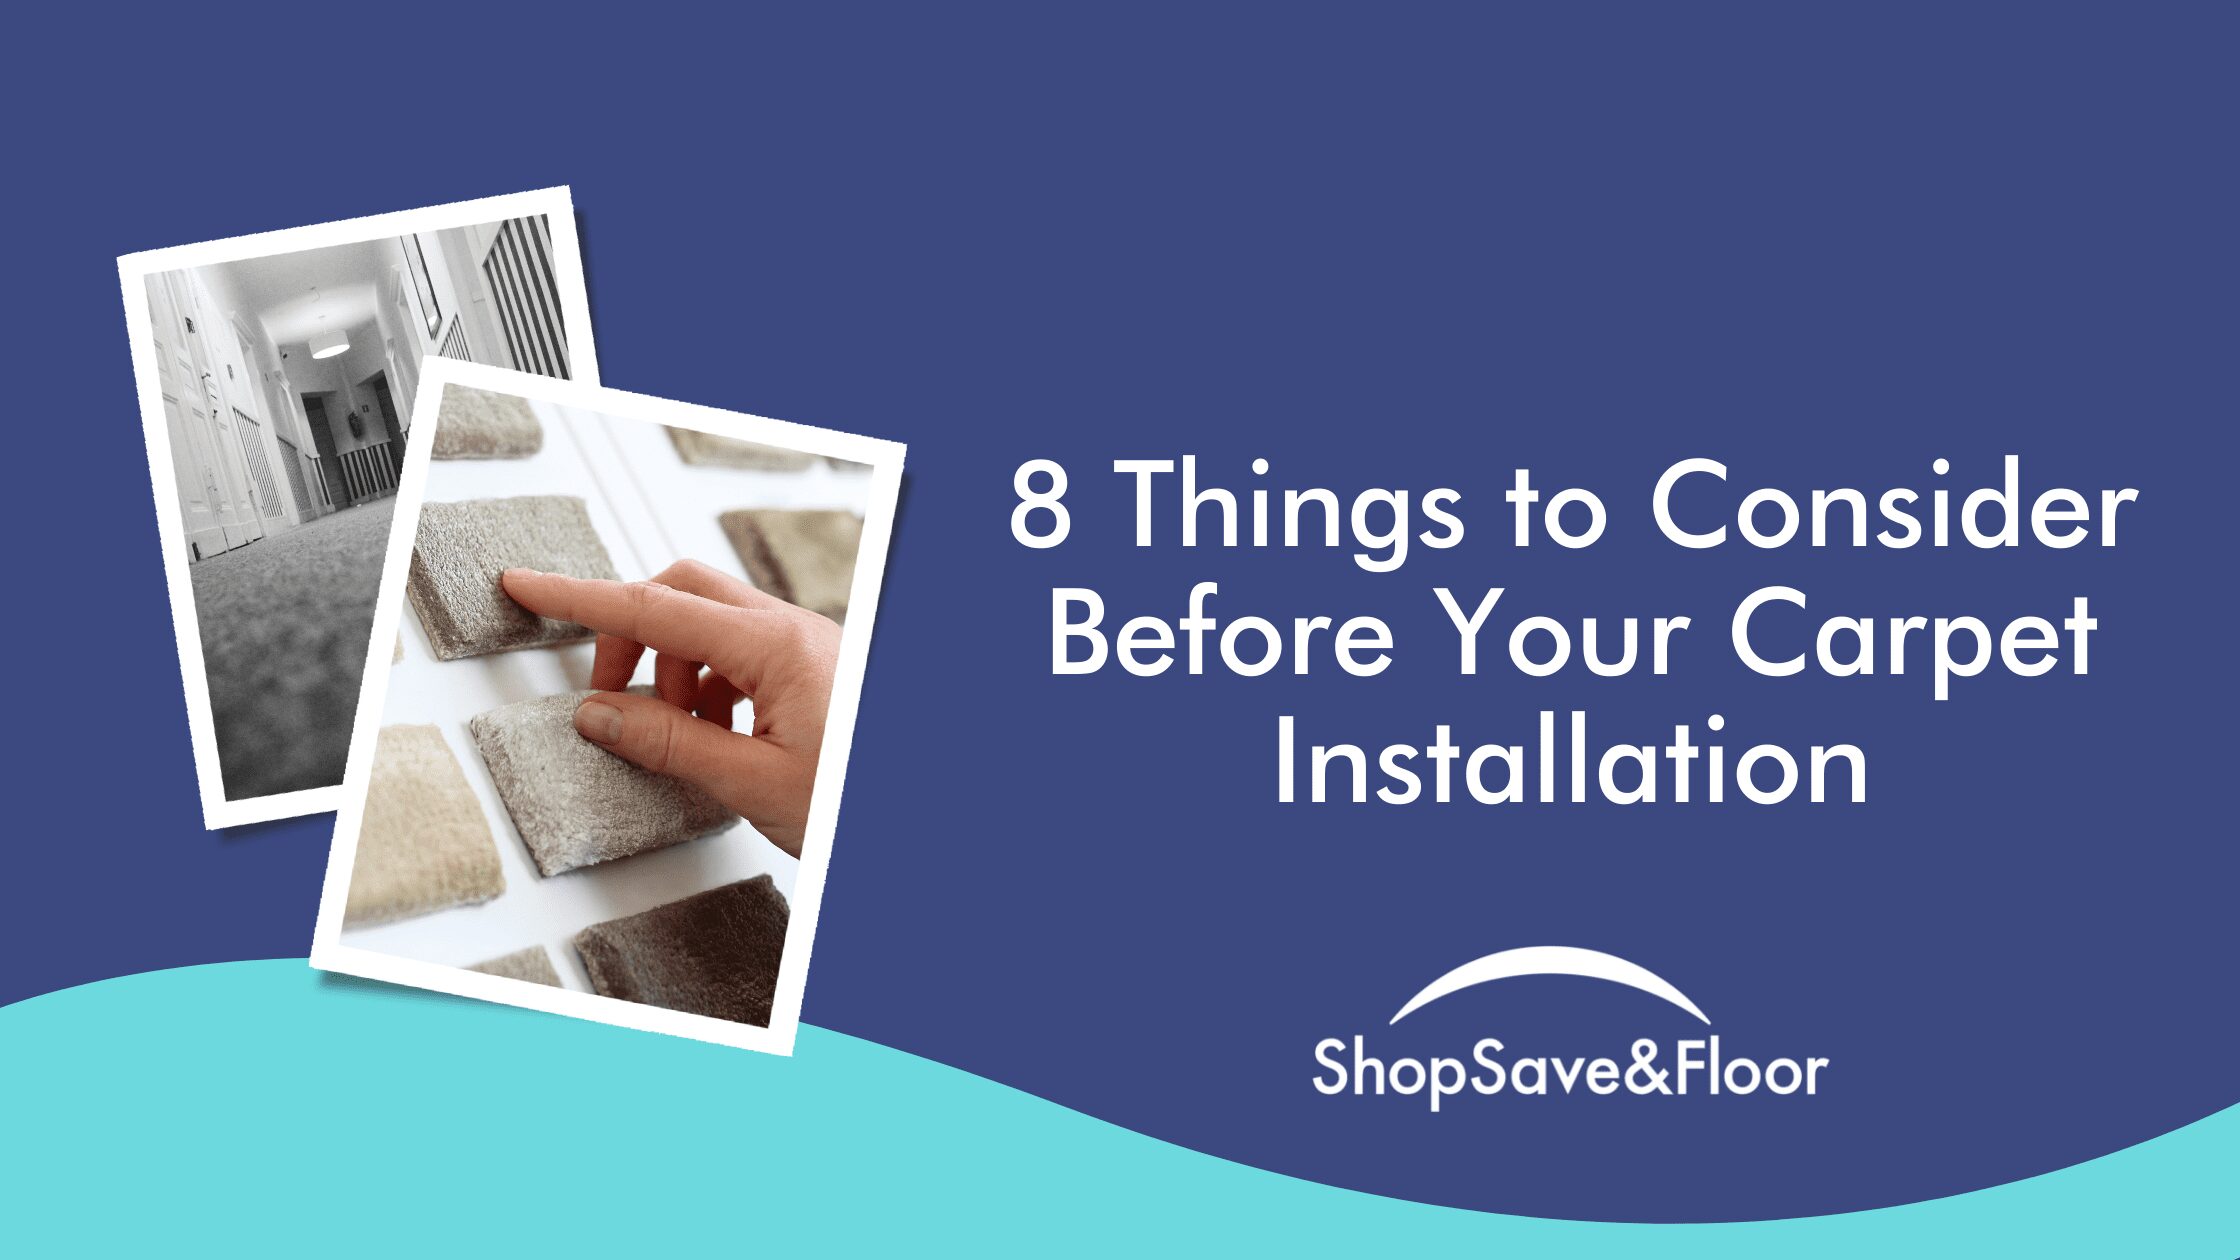 8 Things to Consider Before Your Carpet Installation